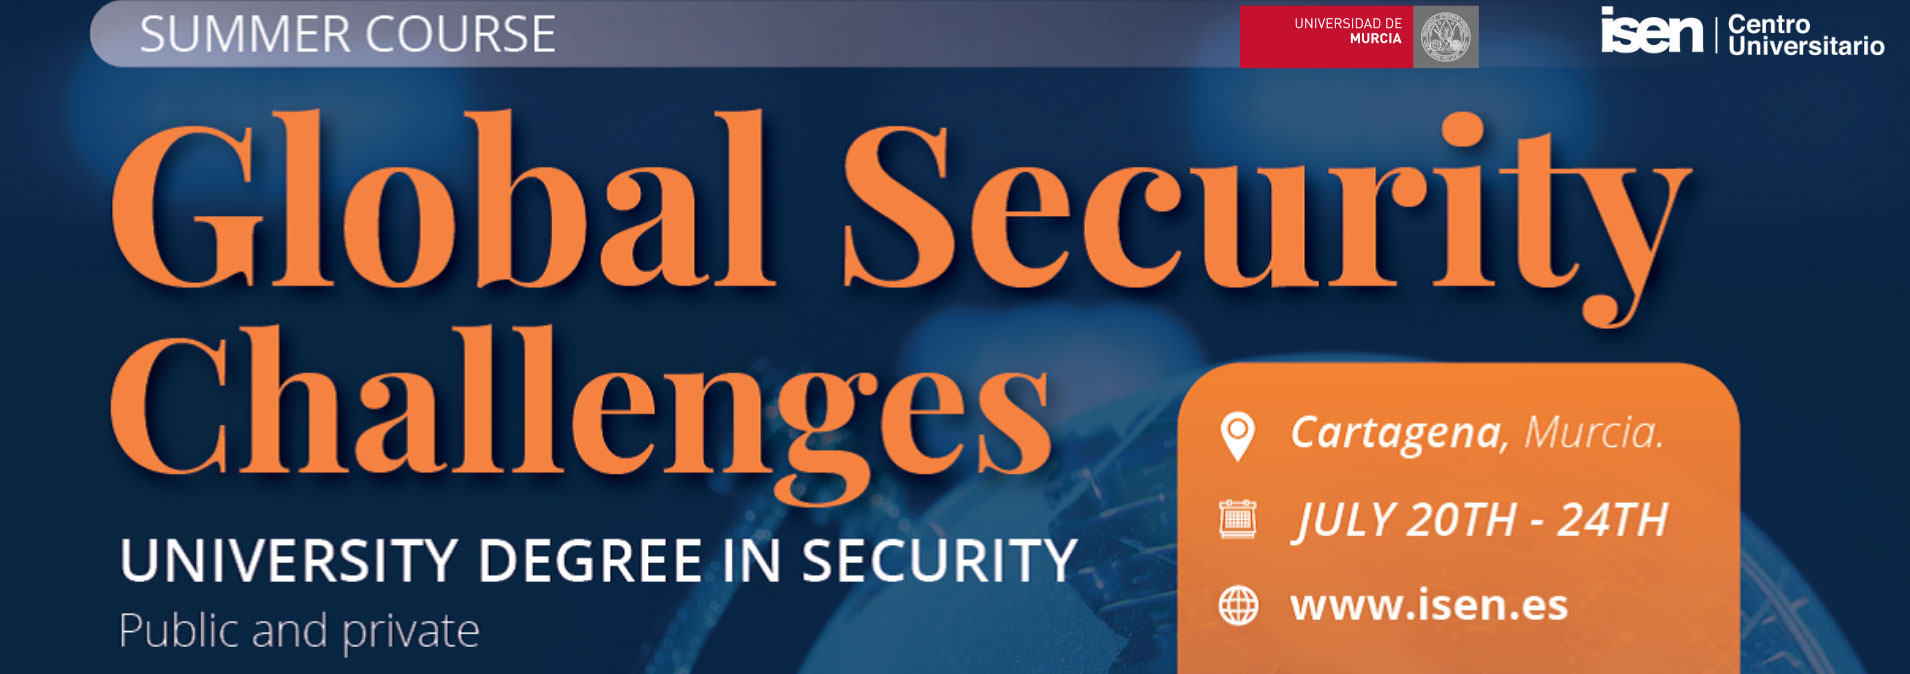 GLOBAL SECURITY CHALLENGES 